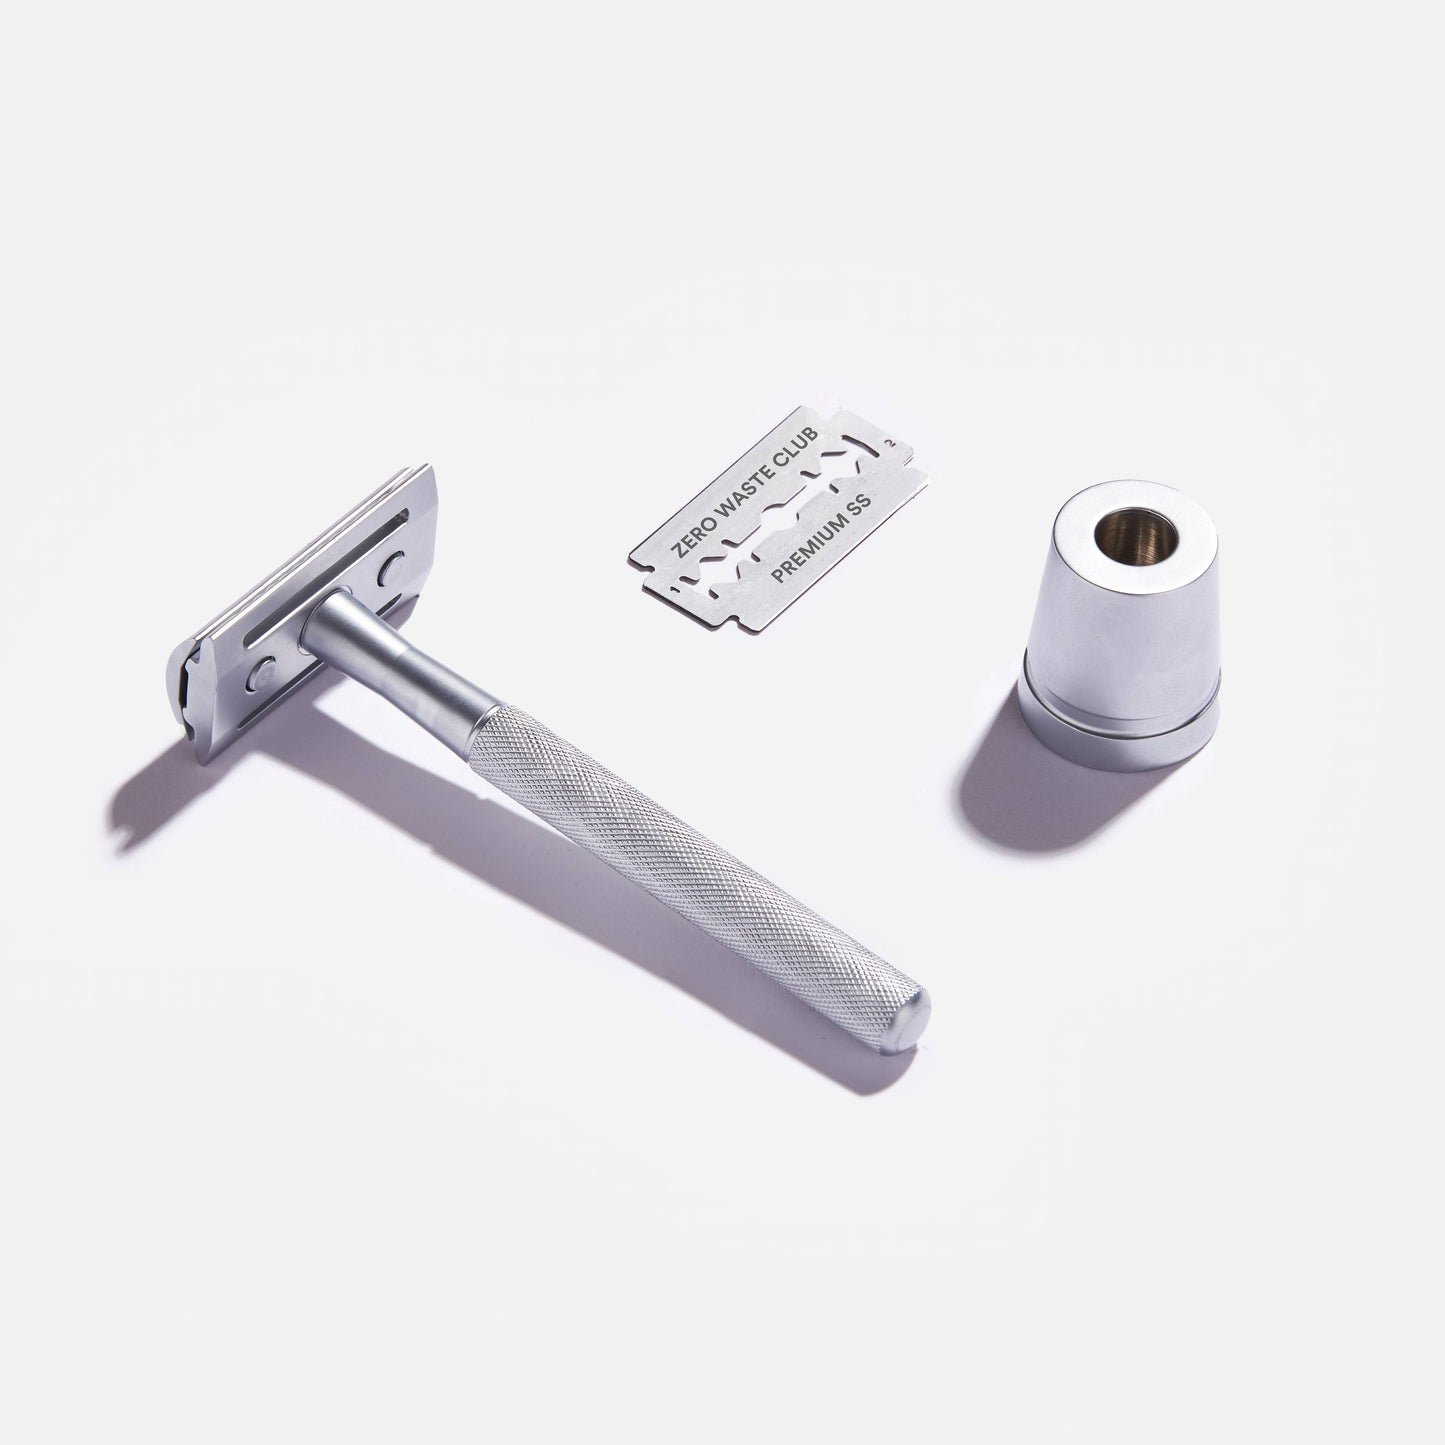 Reusable Safety Razor with Stand - 10 Blades Included: Matte Silver